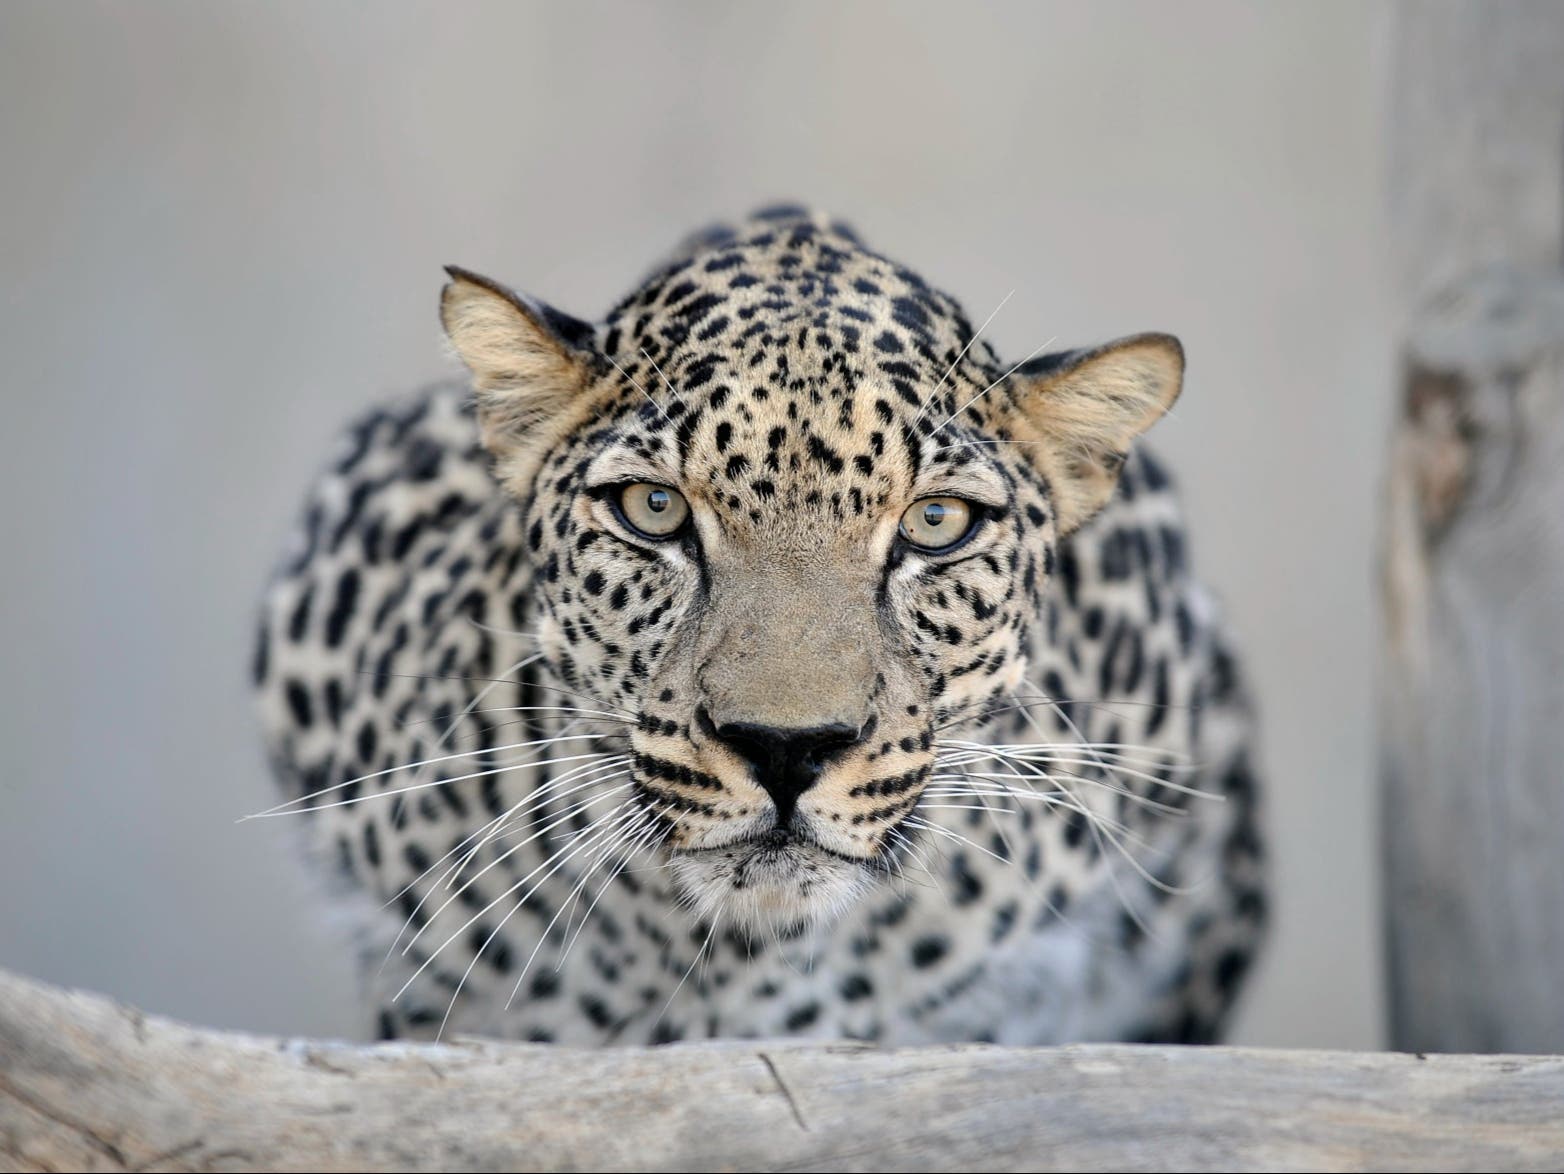 <p>The Arabian leopard is currently endangered but a rewilding initiative is looking to change that</p>